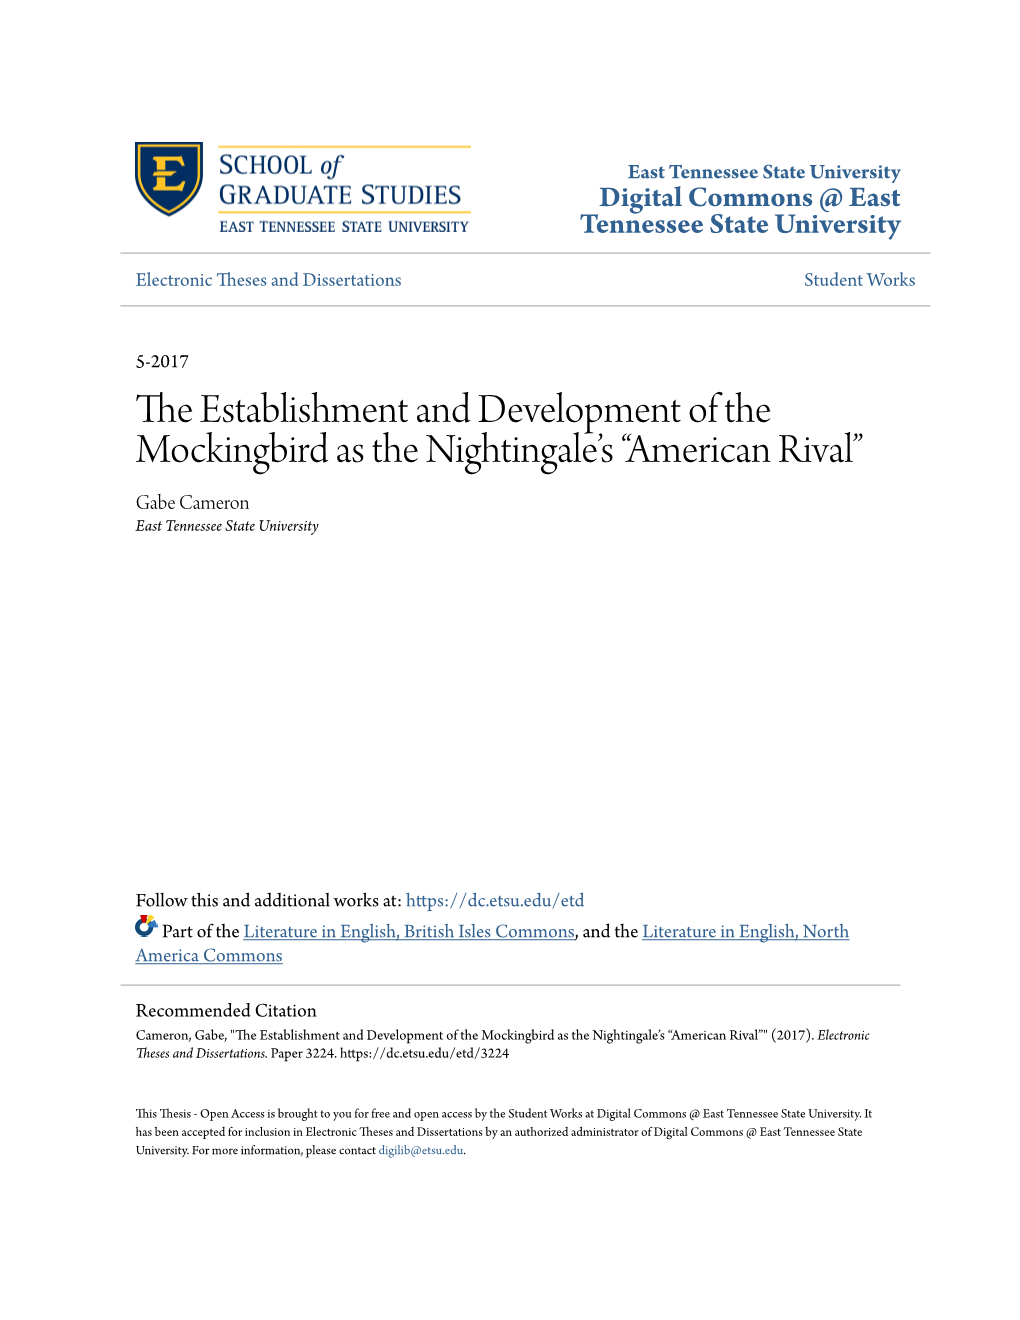 The Establishment and Development of the Mockingbird As the Nightingale’S “American Rival” Gabe Cameron East Tennessee State University